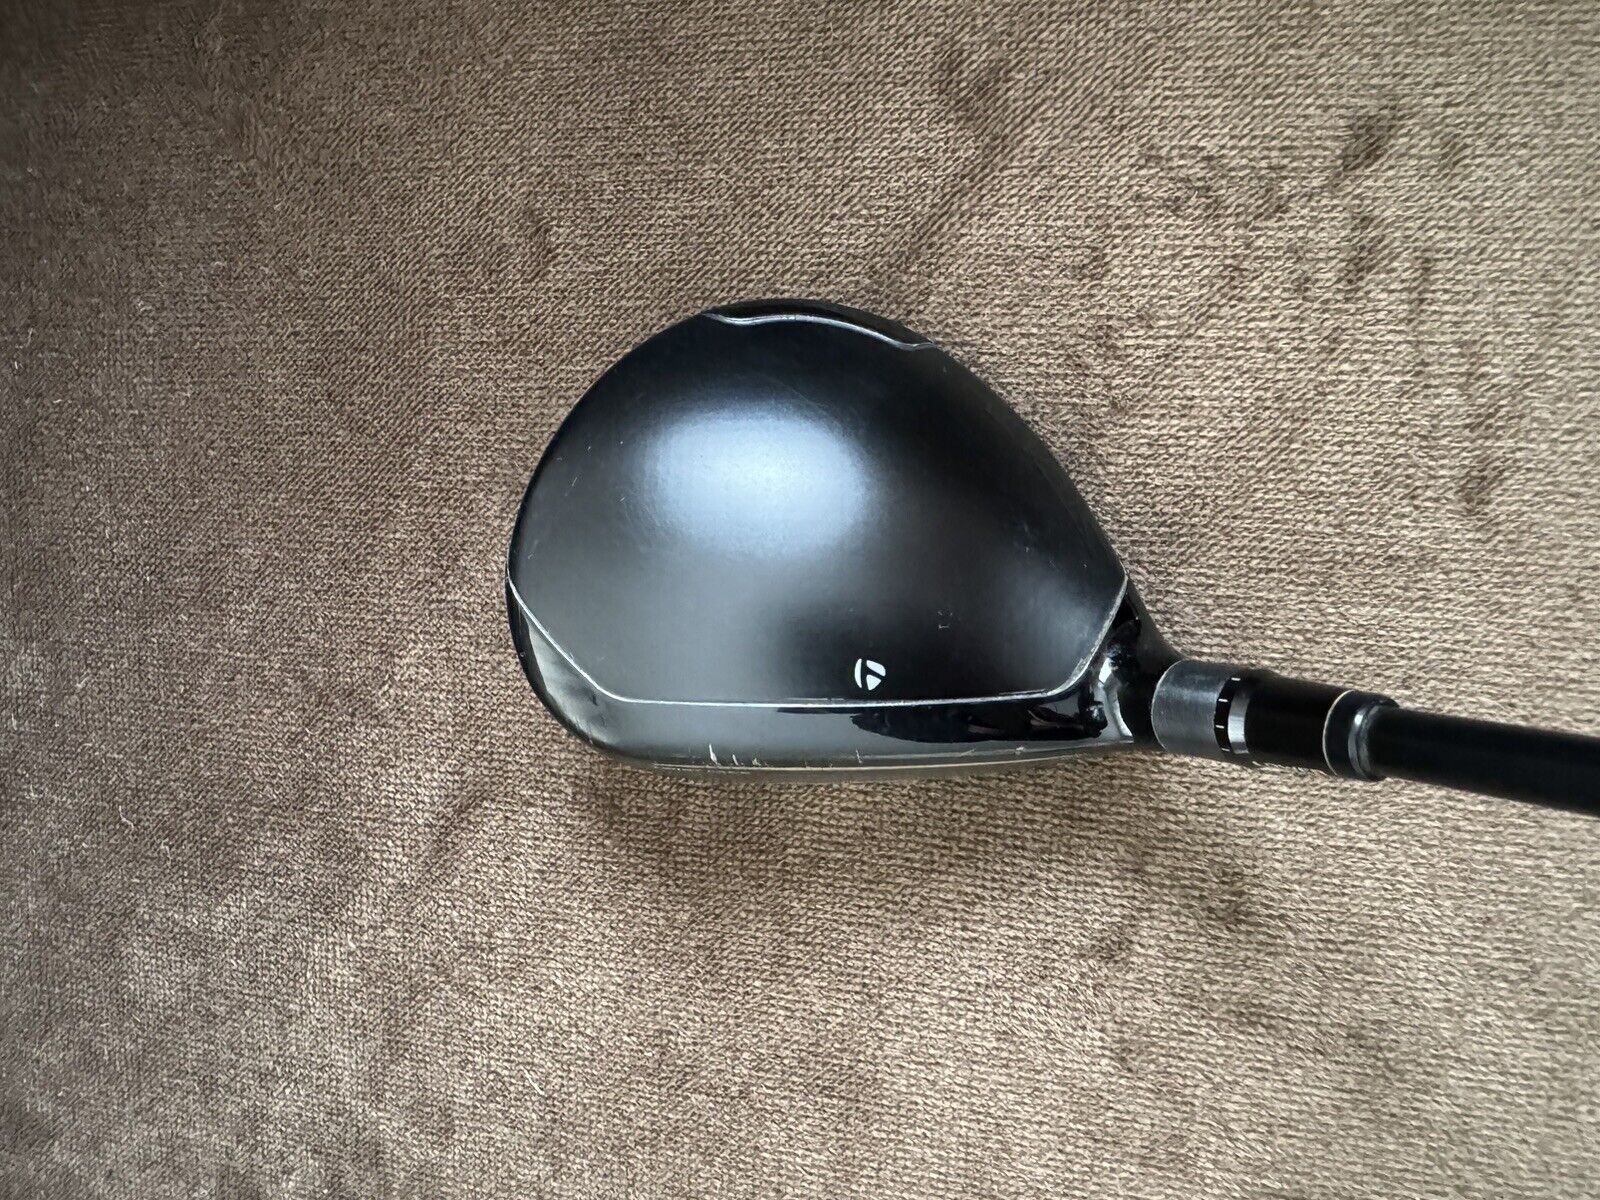 TaylorMade Golf Club STEALTH PLUS 19* 5 Wood Stiff Graphite Great Condition